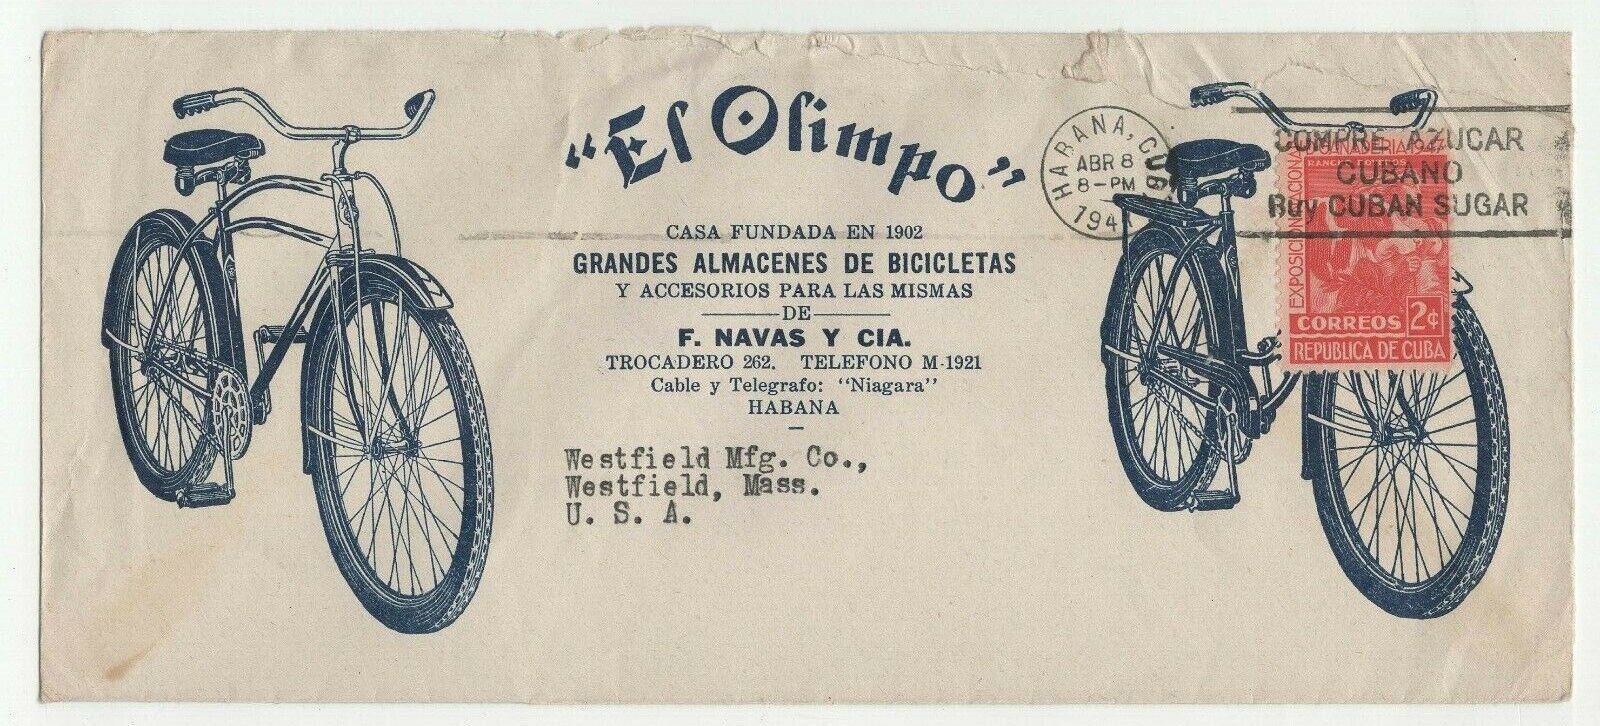 Stamps cover, EL OLIMPO Bicycle Department Stores 1947